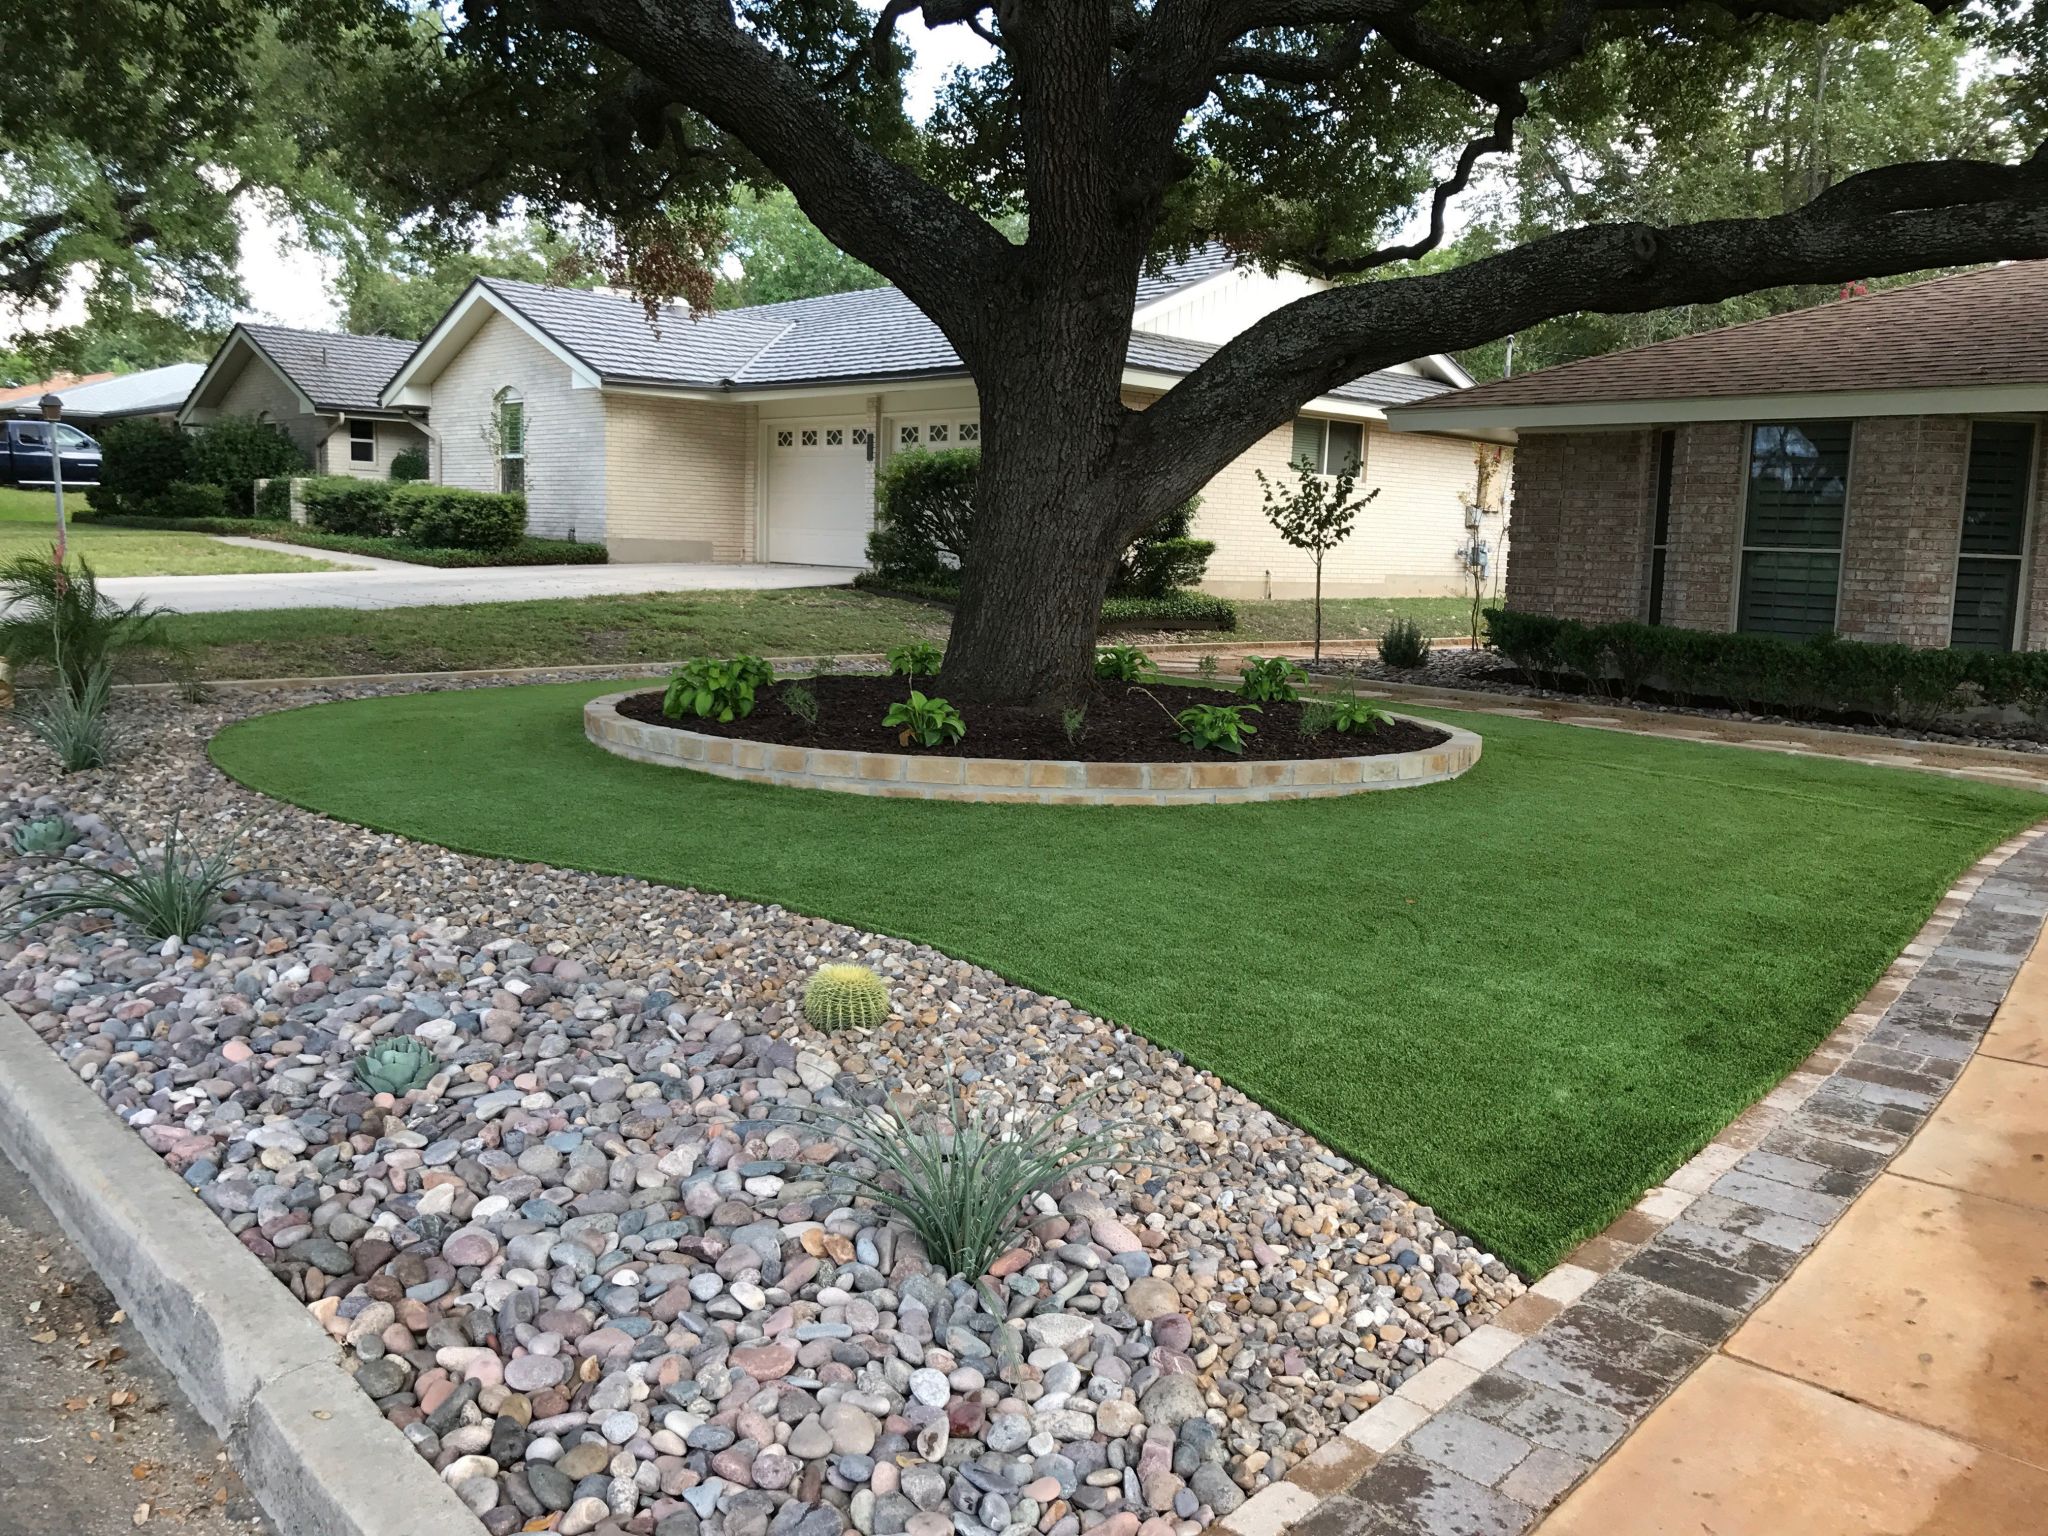 Artificial turf has become a hot trend in residential areas